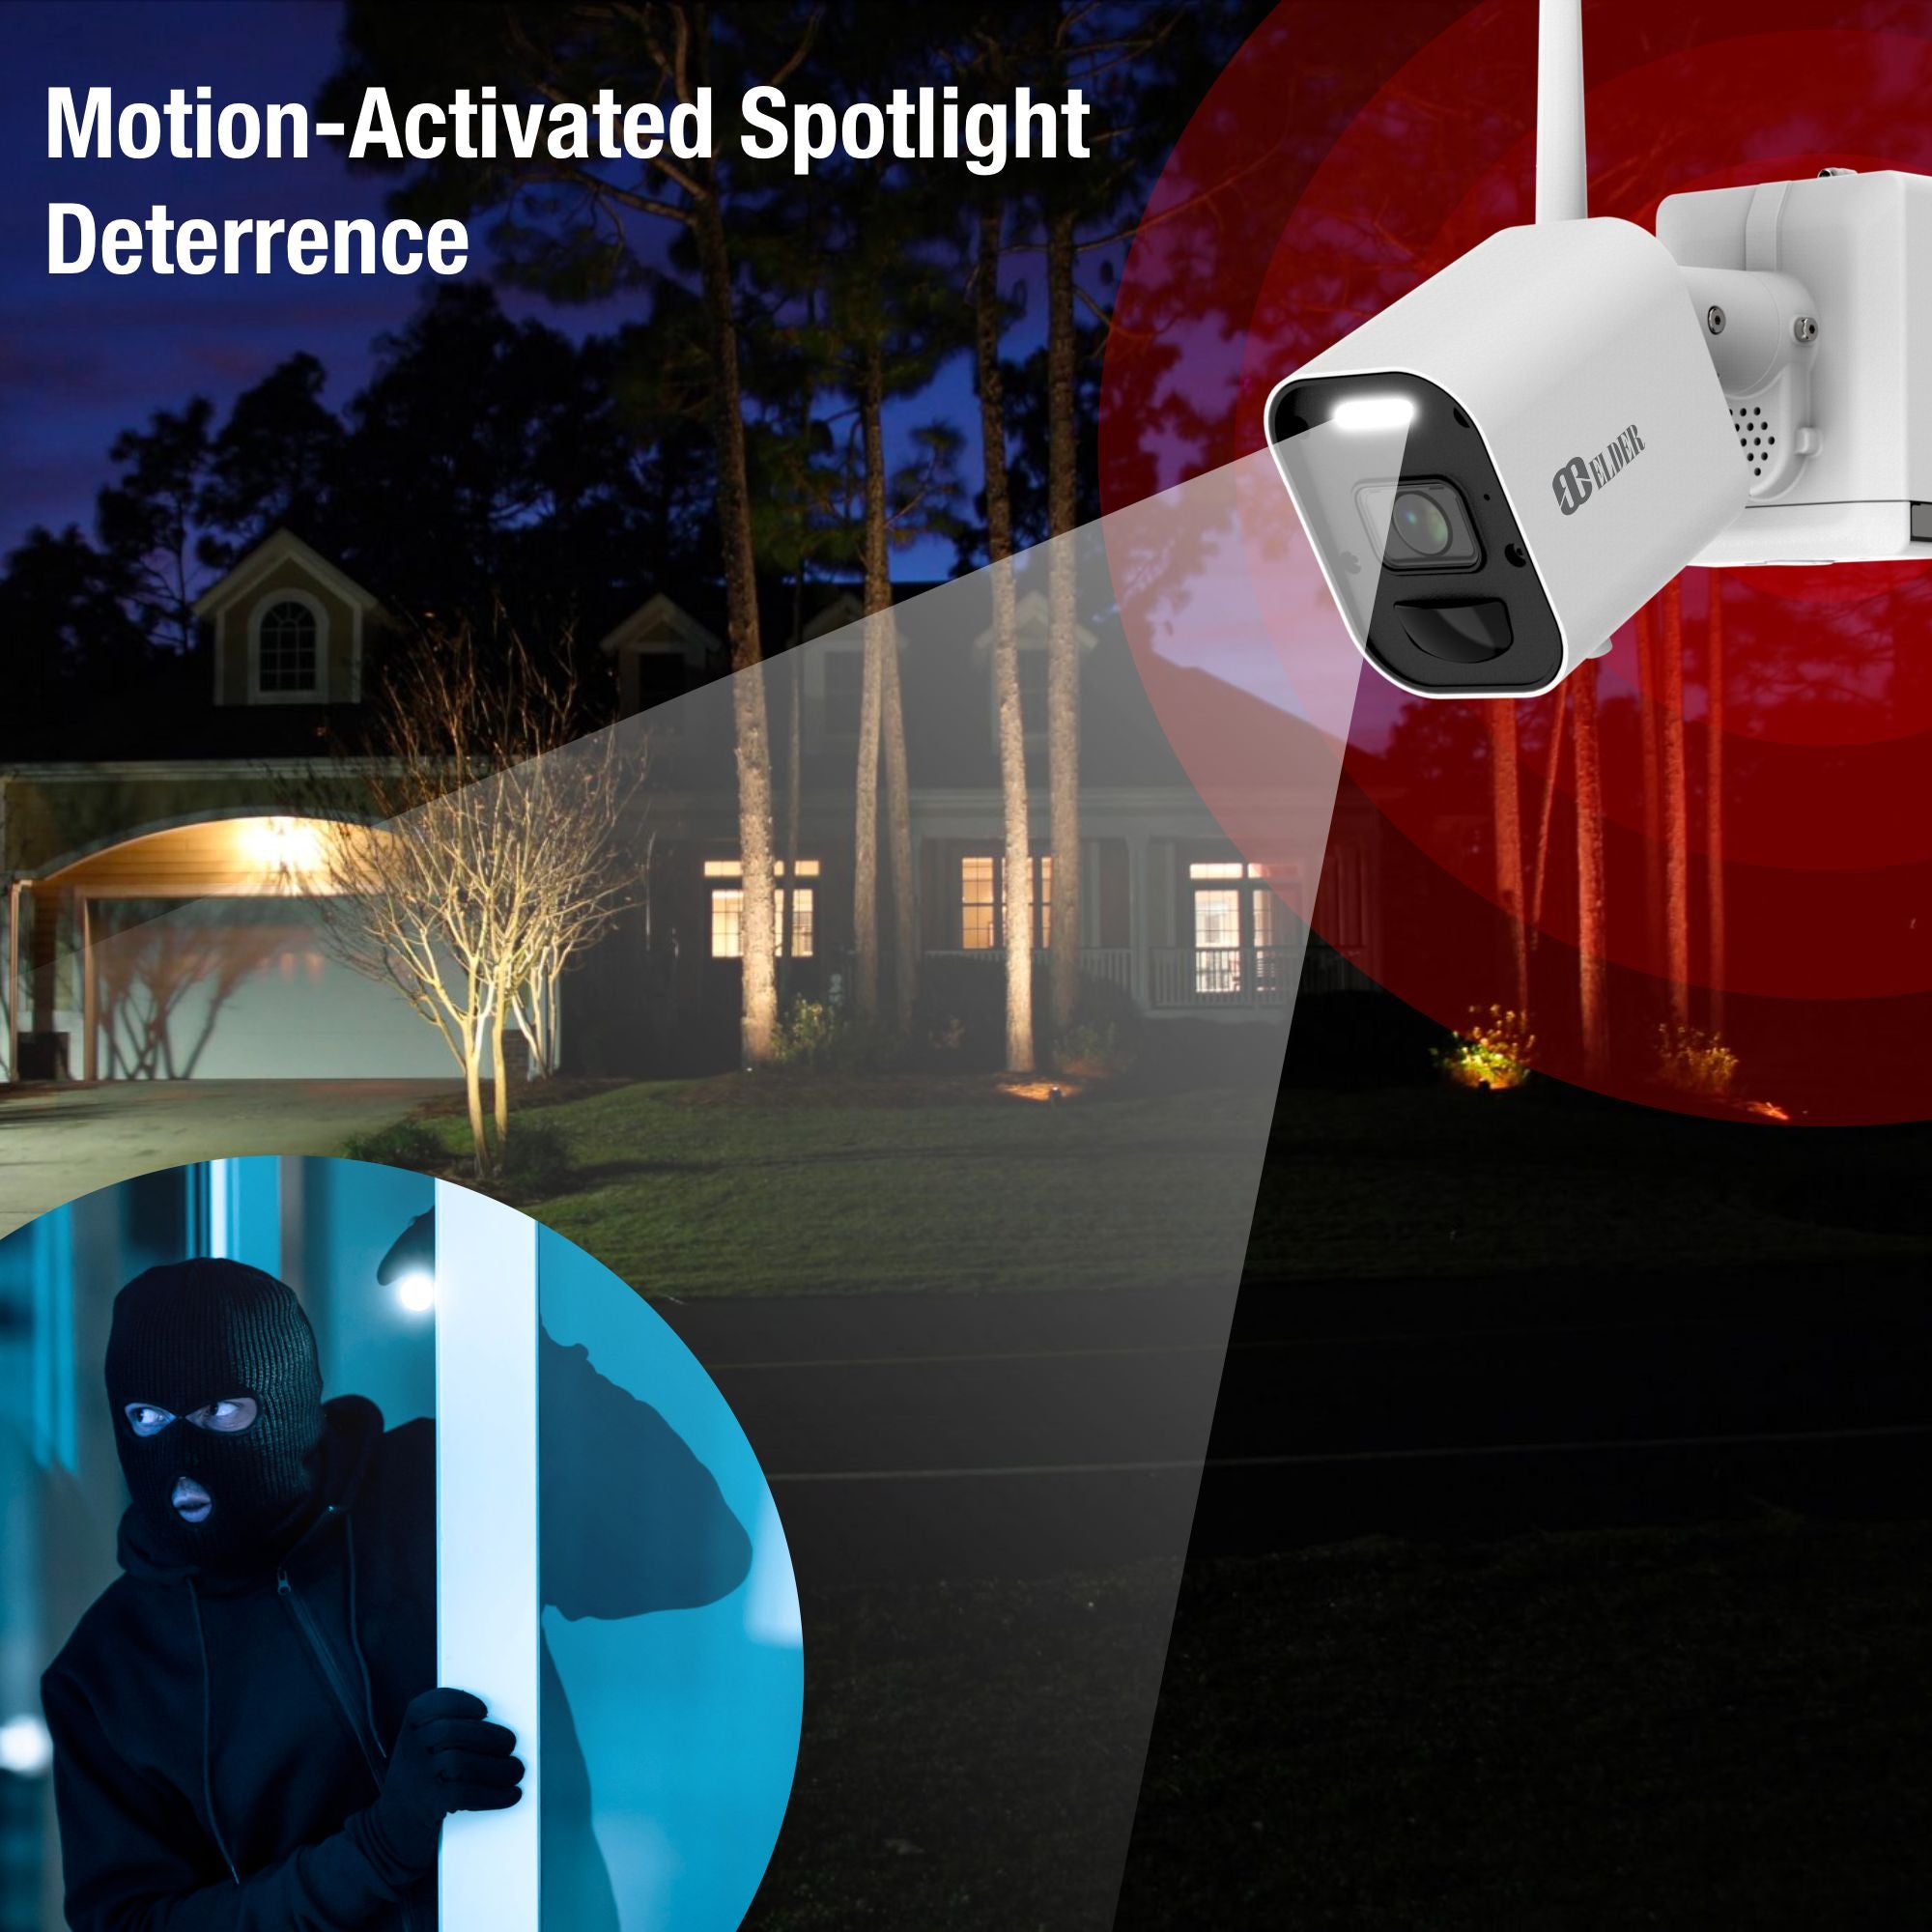 Motion-Activated Spotlight Security Camera with Siren and Deterrence